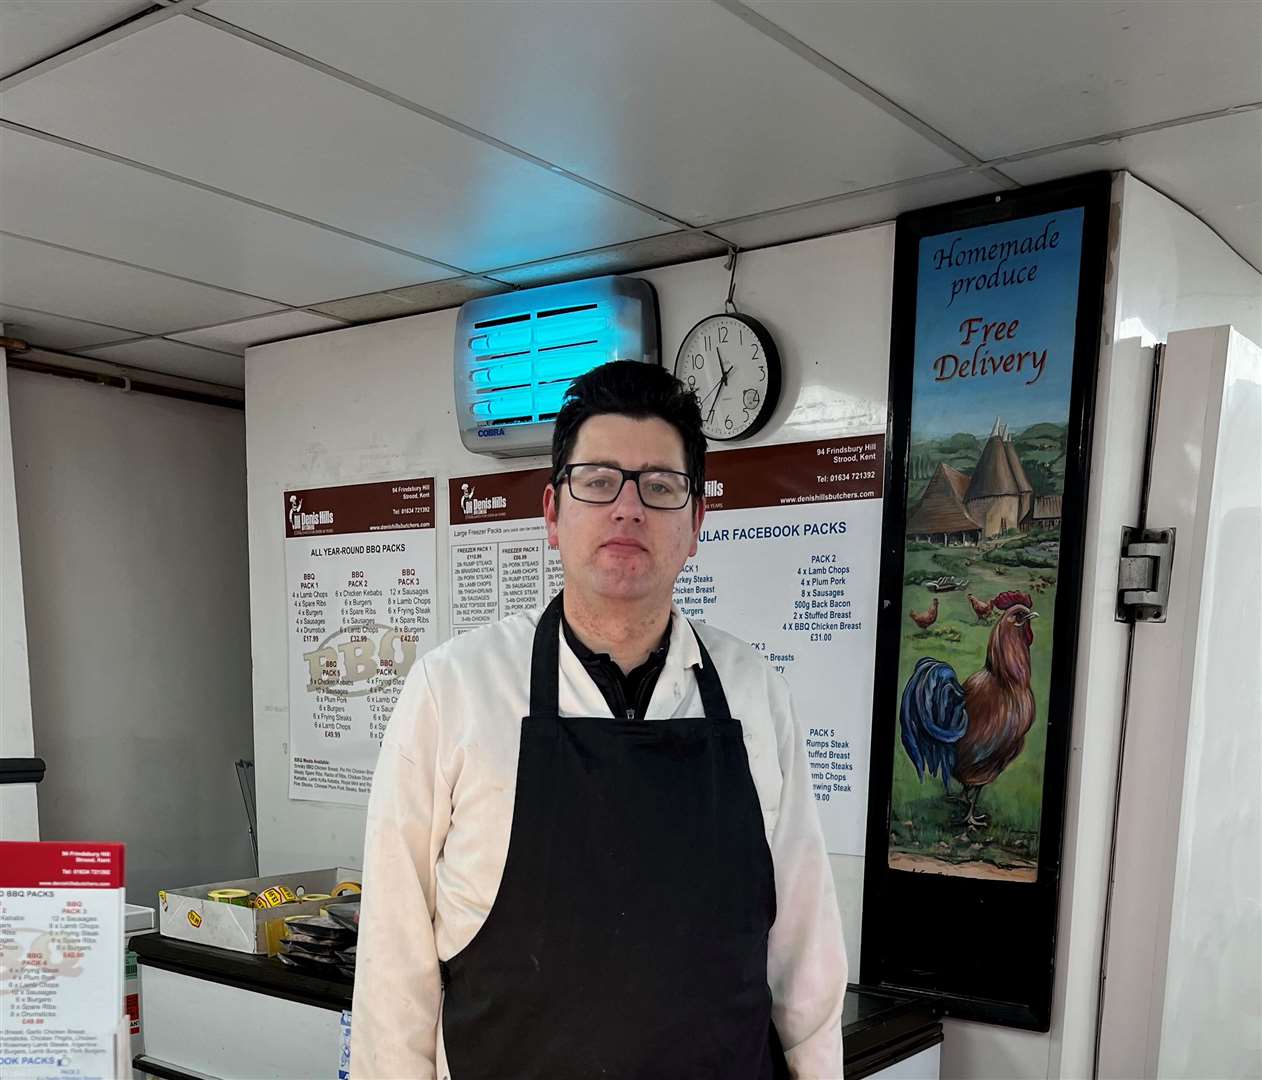 Adam Stone, manager at Denis Hills Quality Butchers on Frindsbury Hill, is upset at the loss of trade